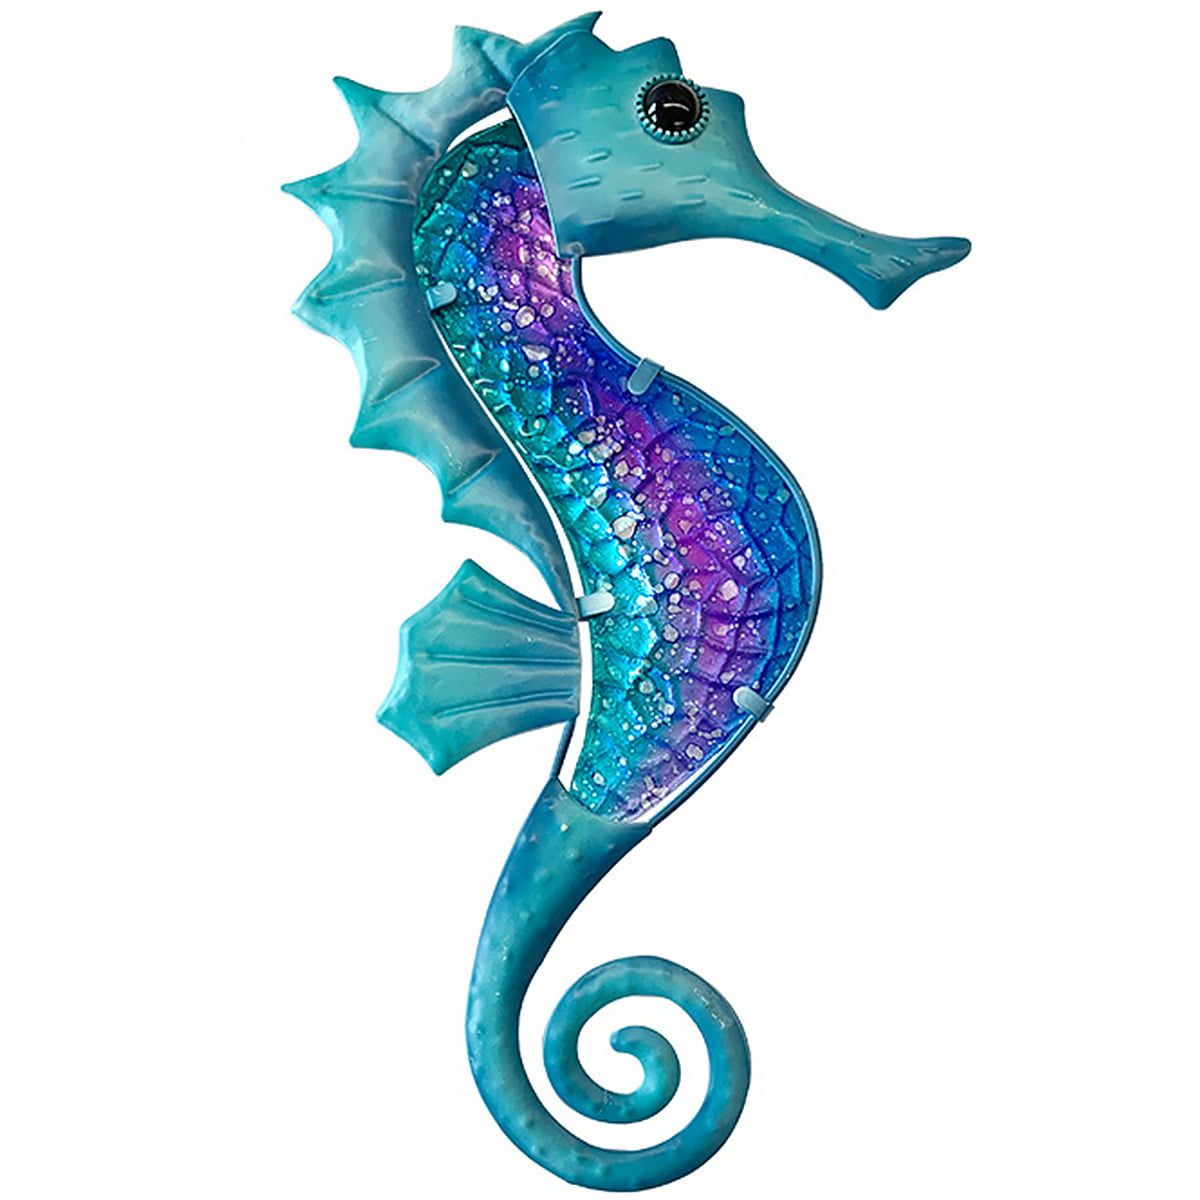 Pcapzz Metal Seahorse Wall Decor,metal Seahorse Owl Wall Art,metal And  Glass Art Sculpture Hanging Decor For Home Patio Porch Garden Bedroom –  Walmart Regarding Best And Newest Seahorse Wall Art (Gallery 18 of 20)